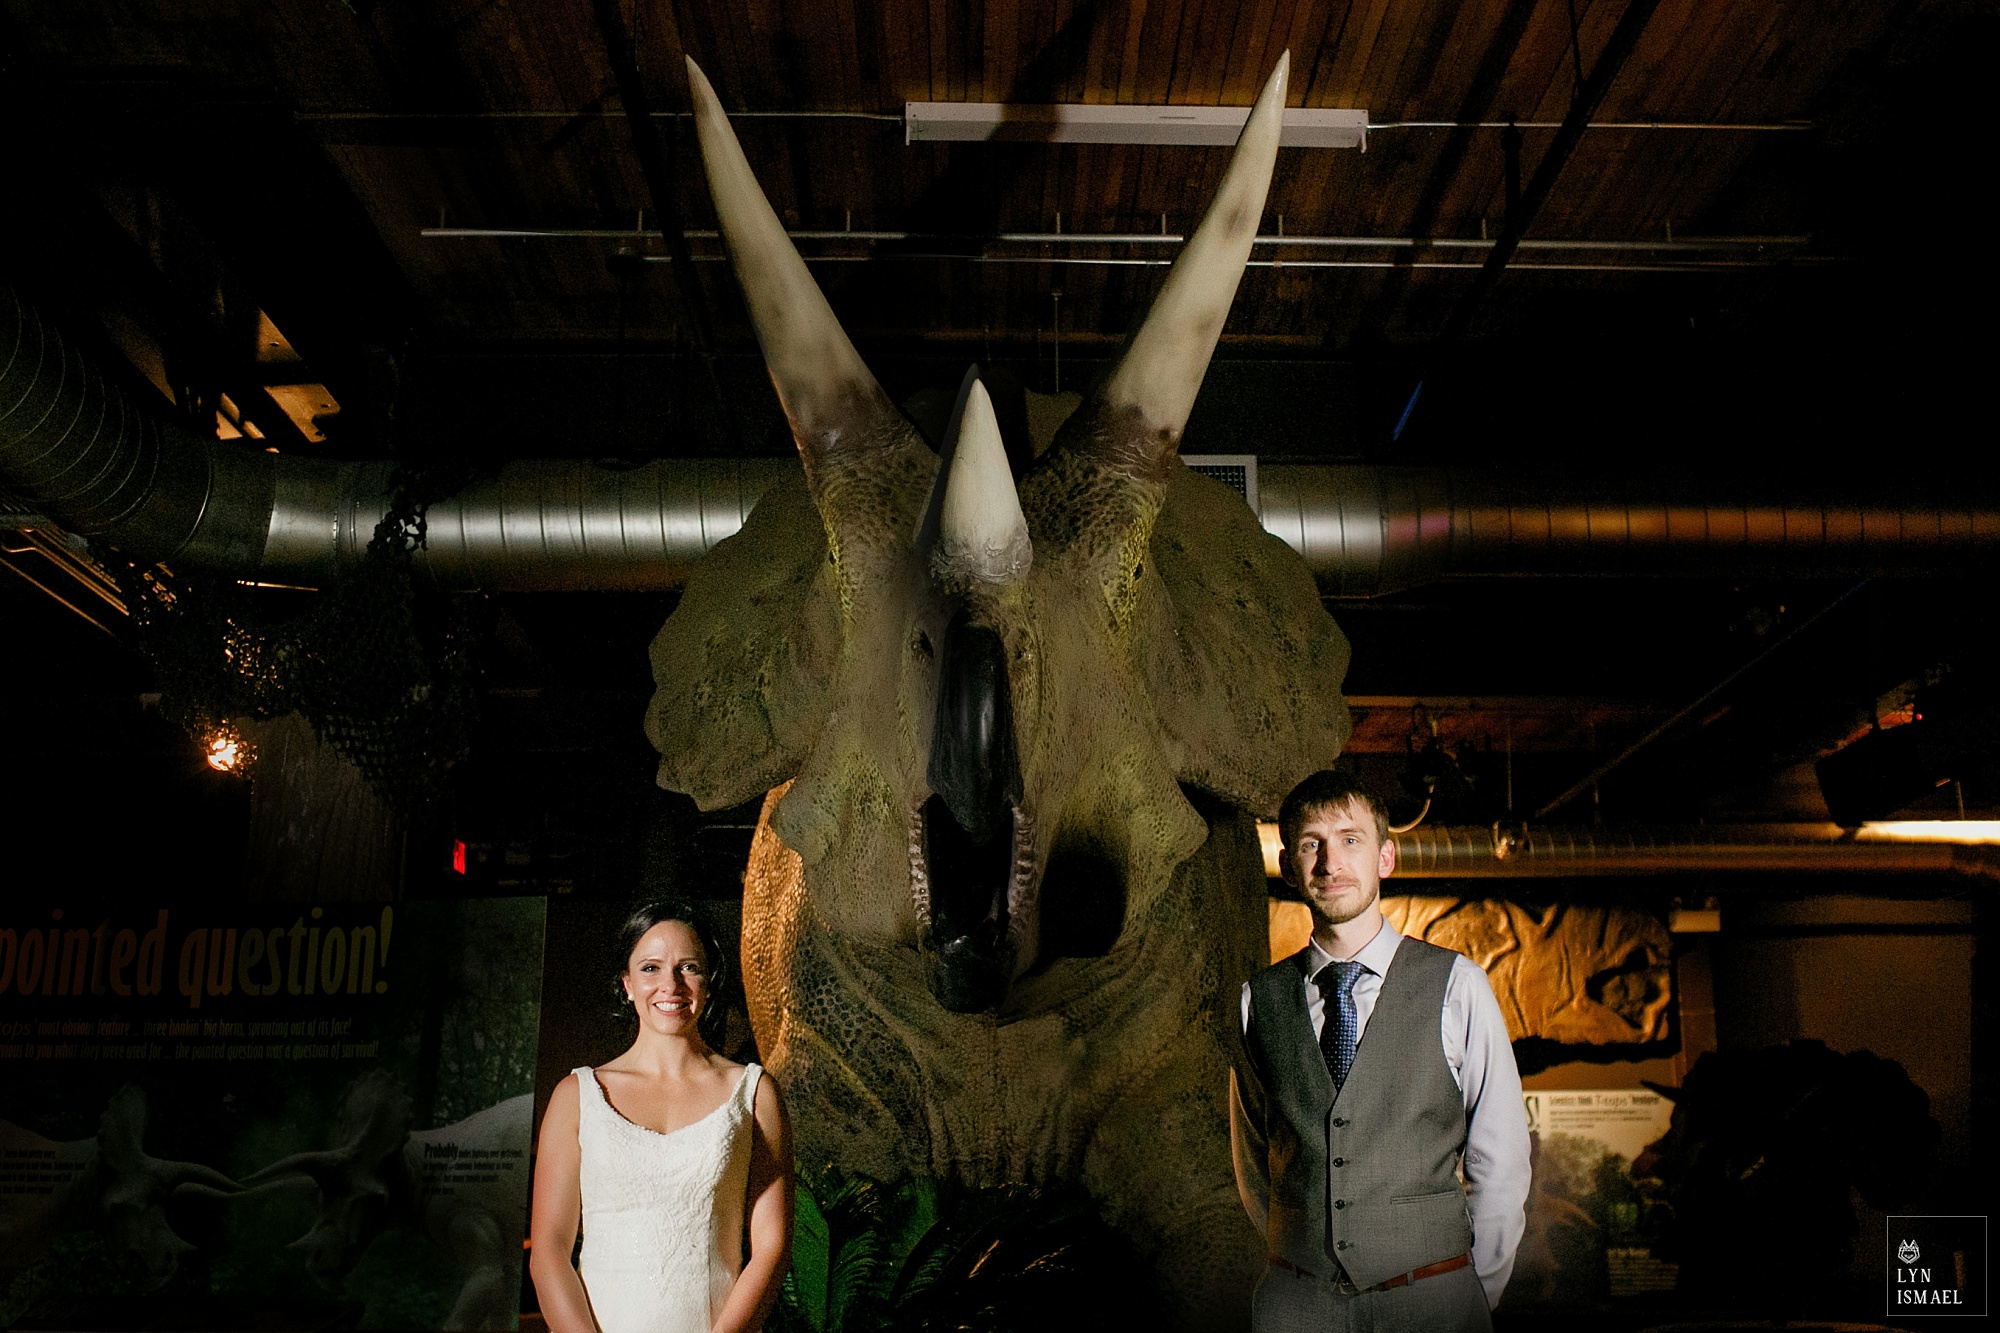 Wedding photo with a triceratops dinosaur